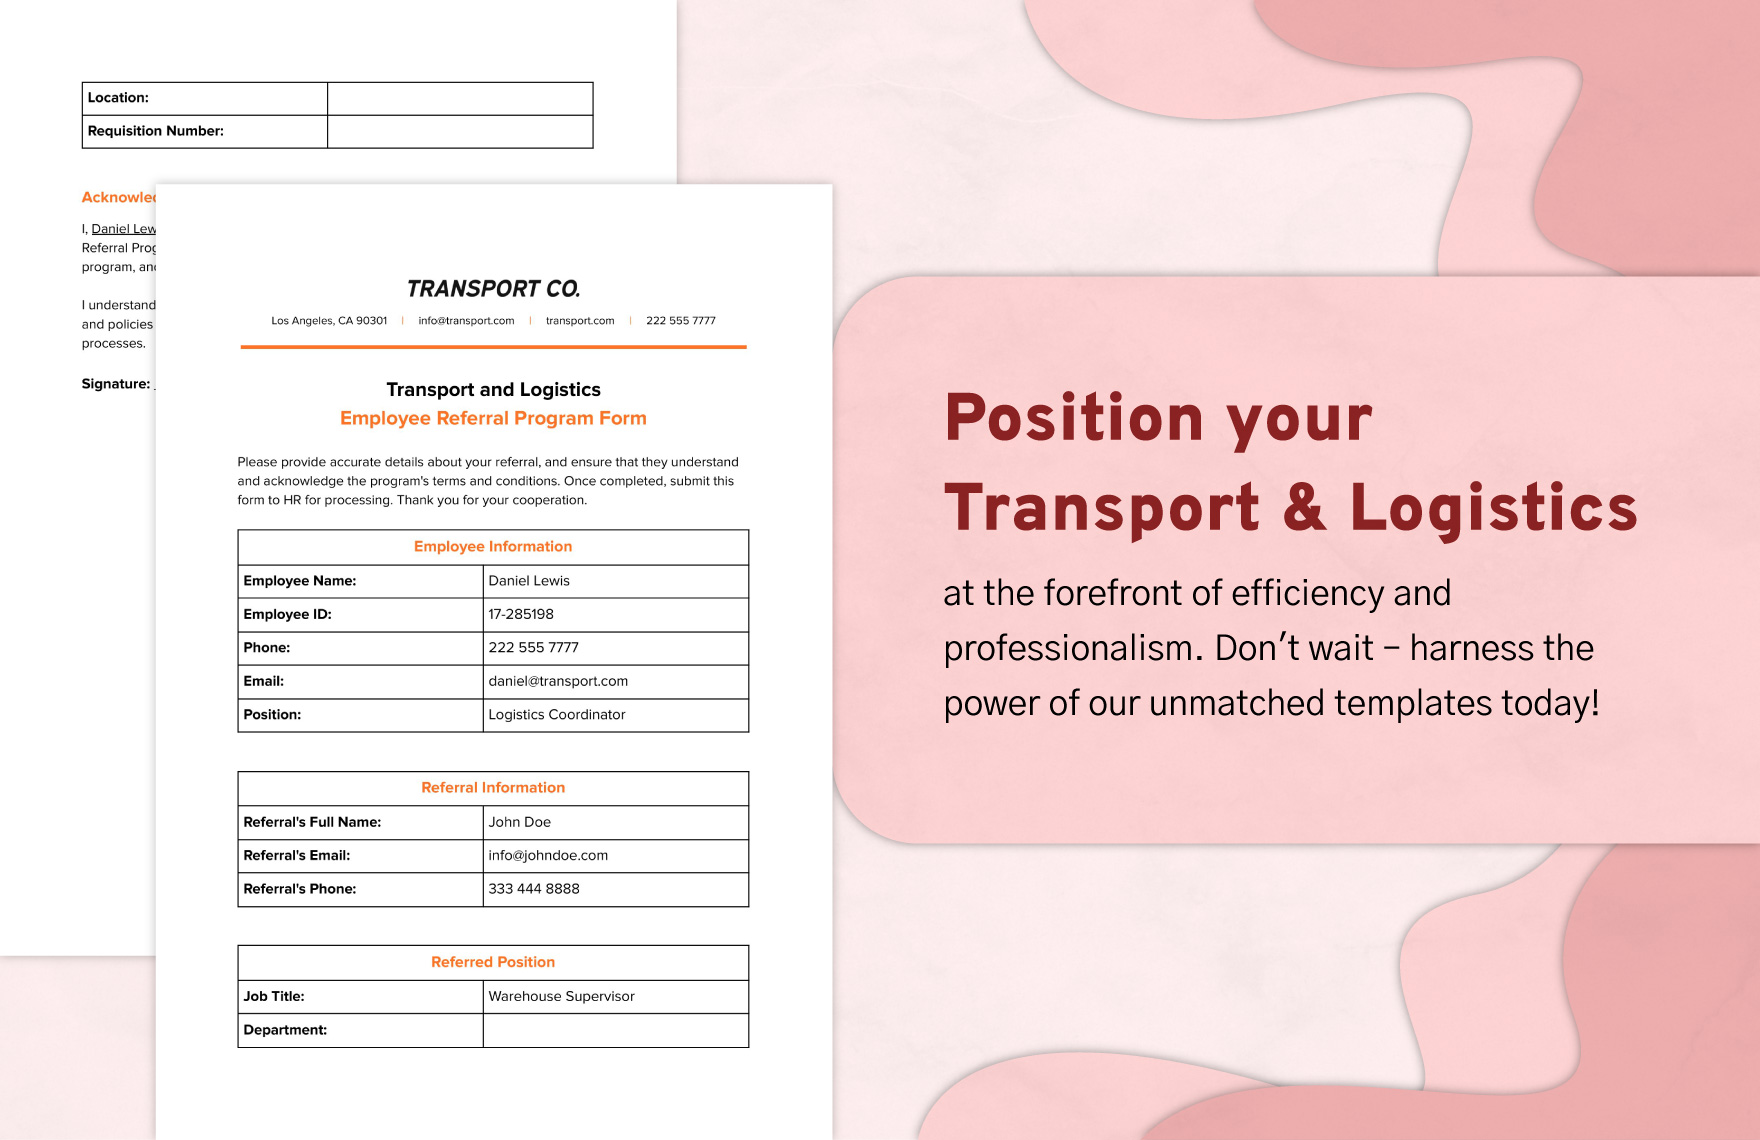 Transport and Logistics Employee Referral Program Form Template